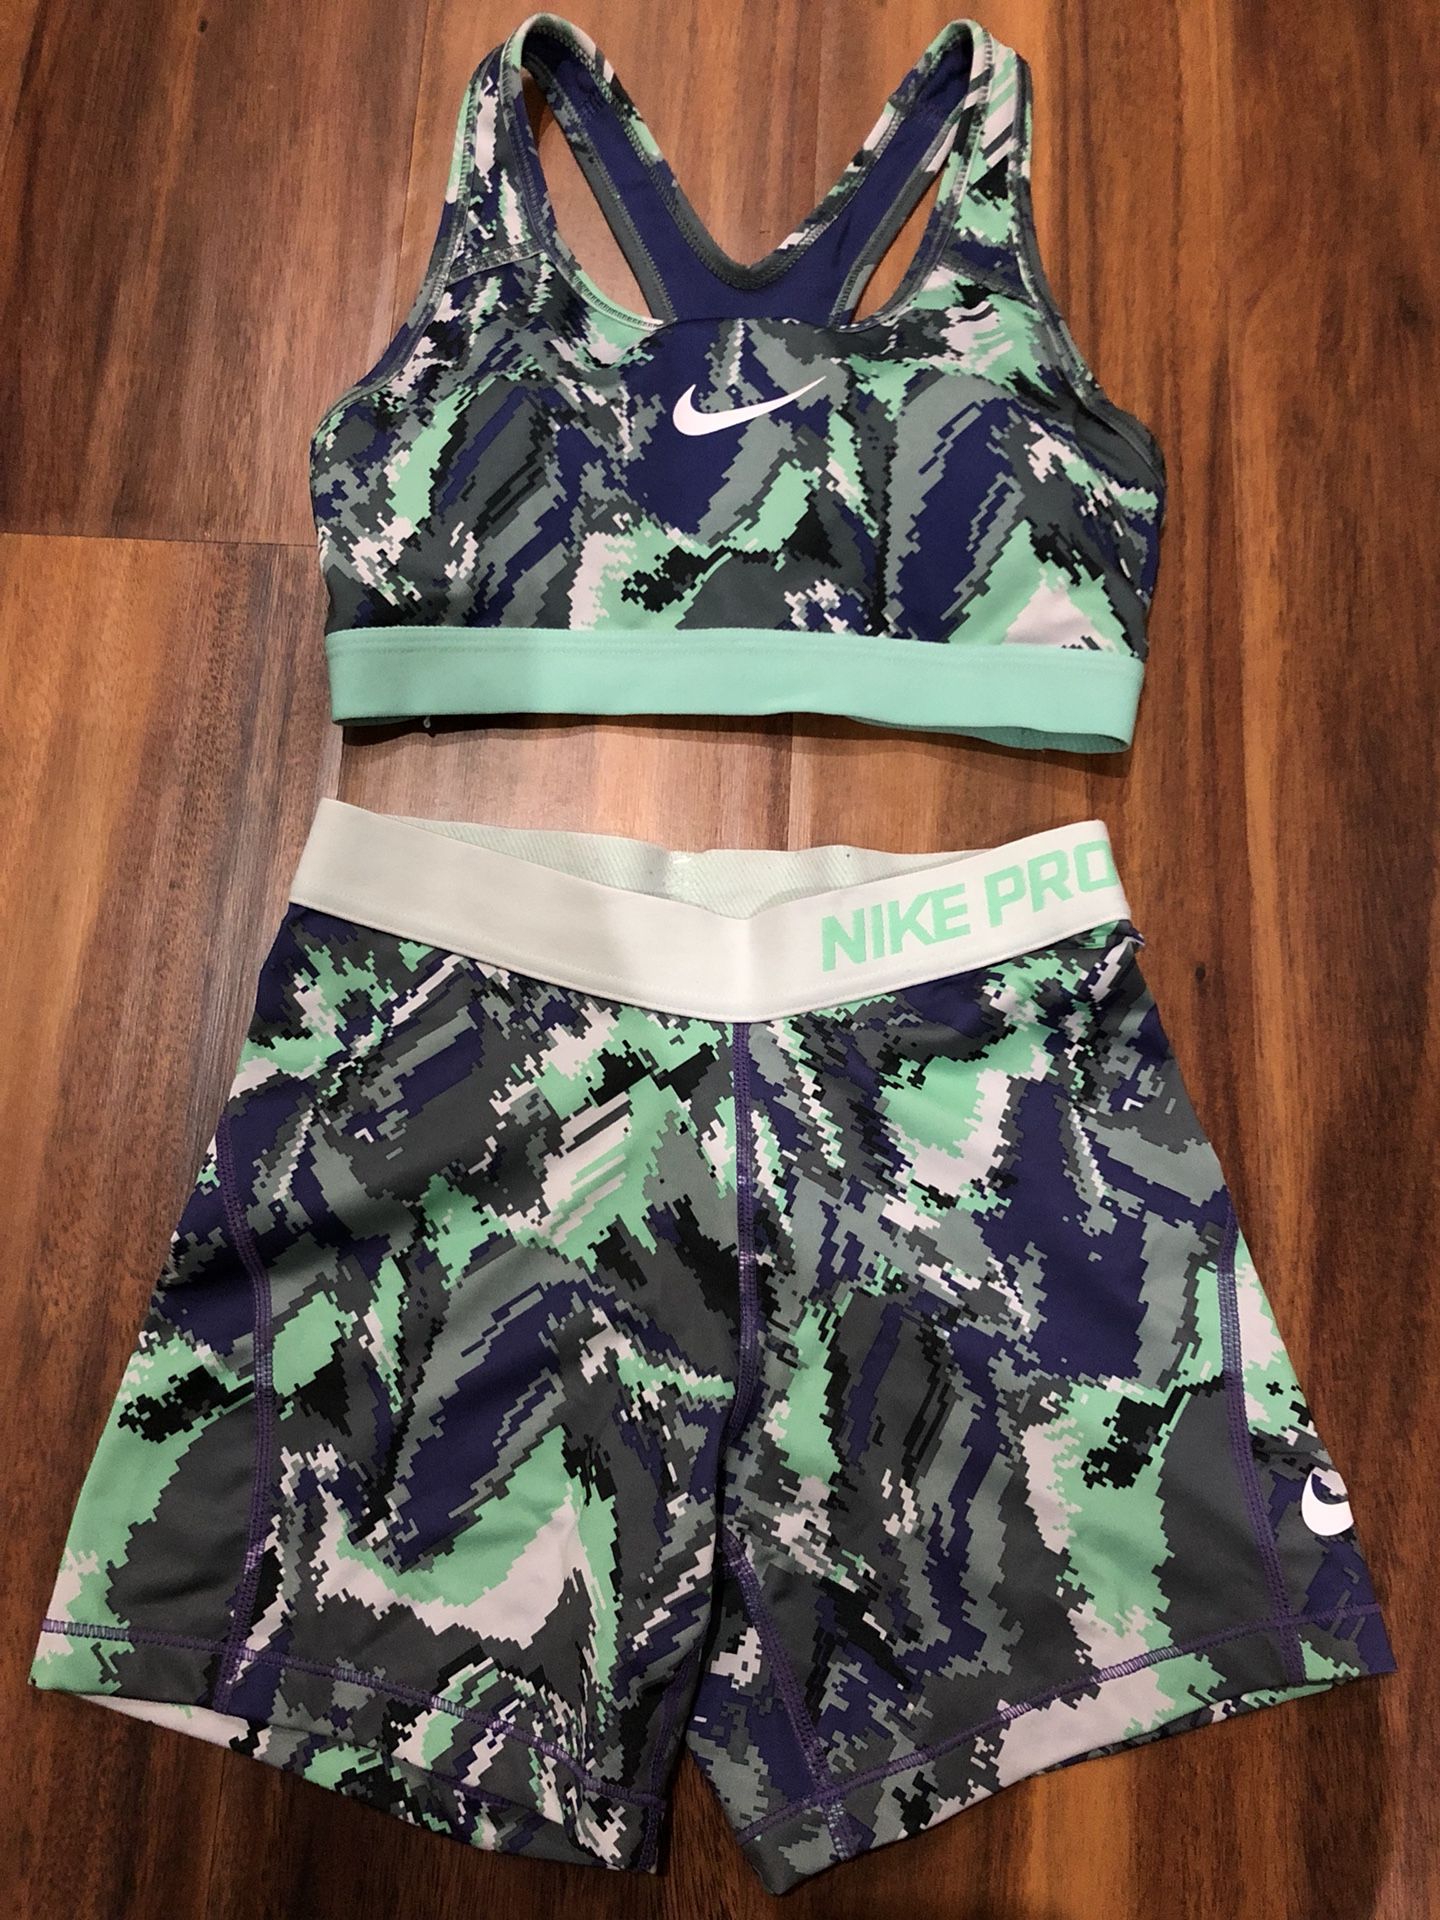 Nike Pro shorts and sports bra set YL and Adult XS for Sale in Pompano  Beach, FL - OfferUp